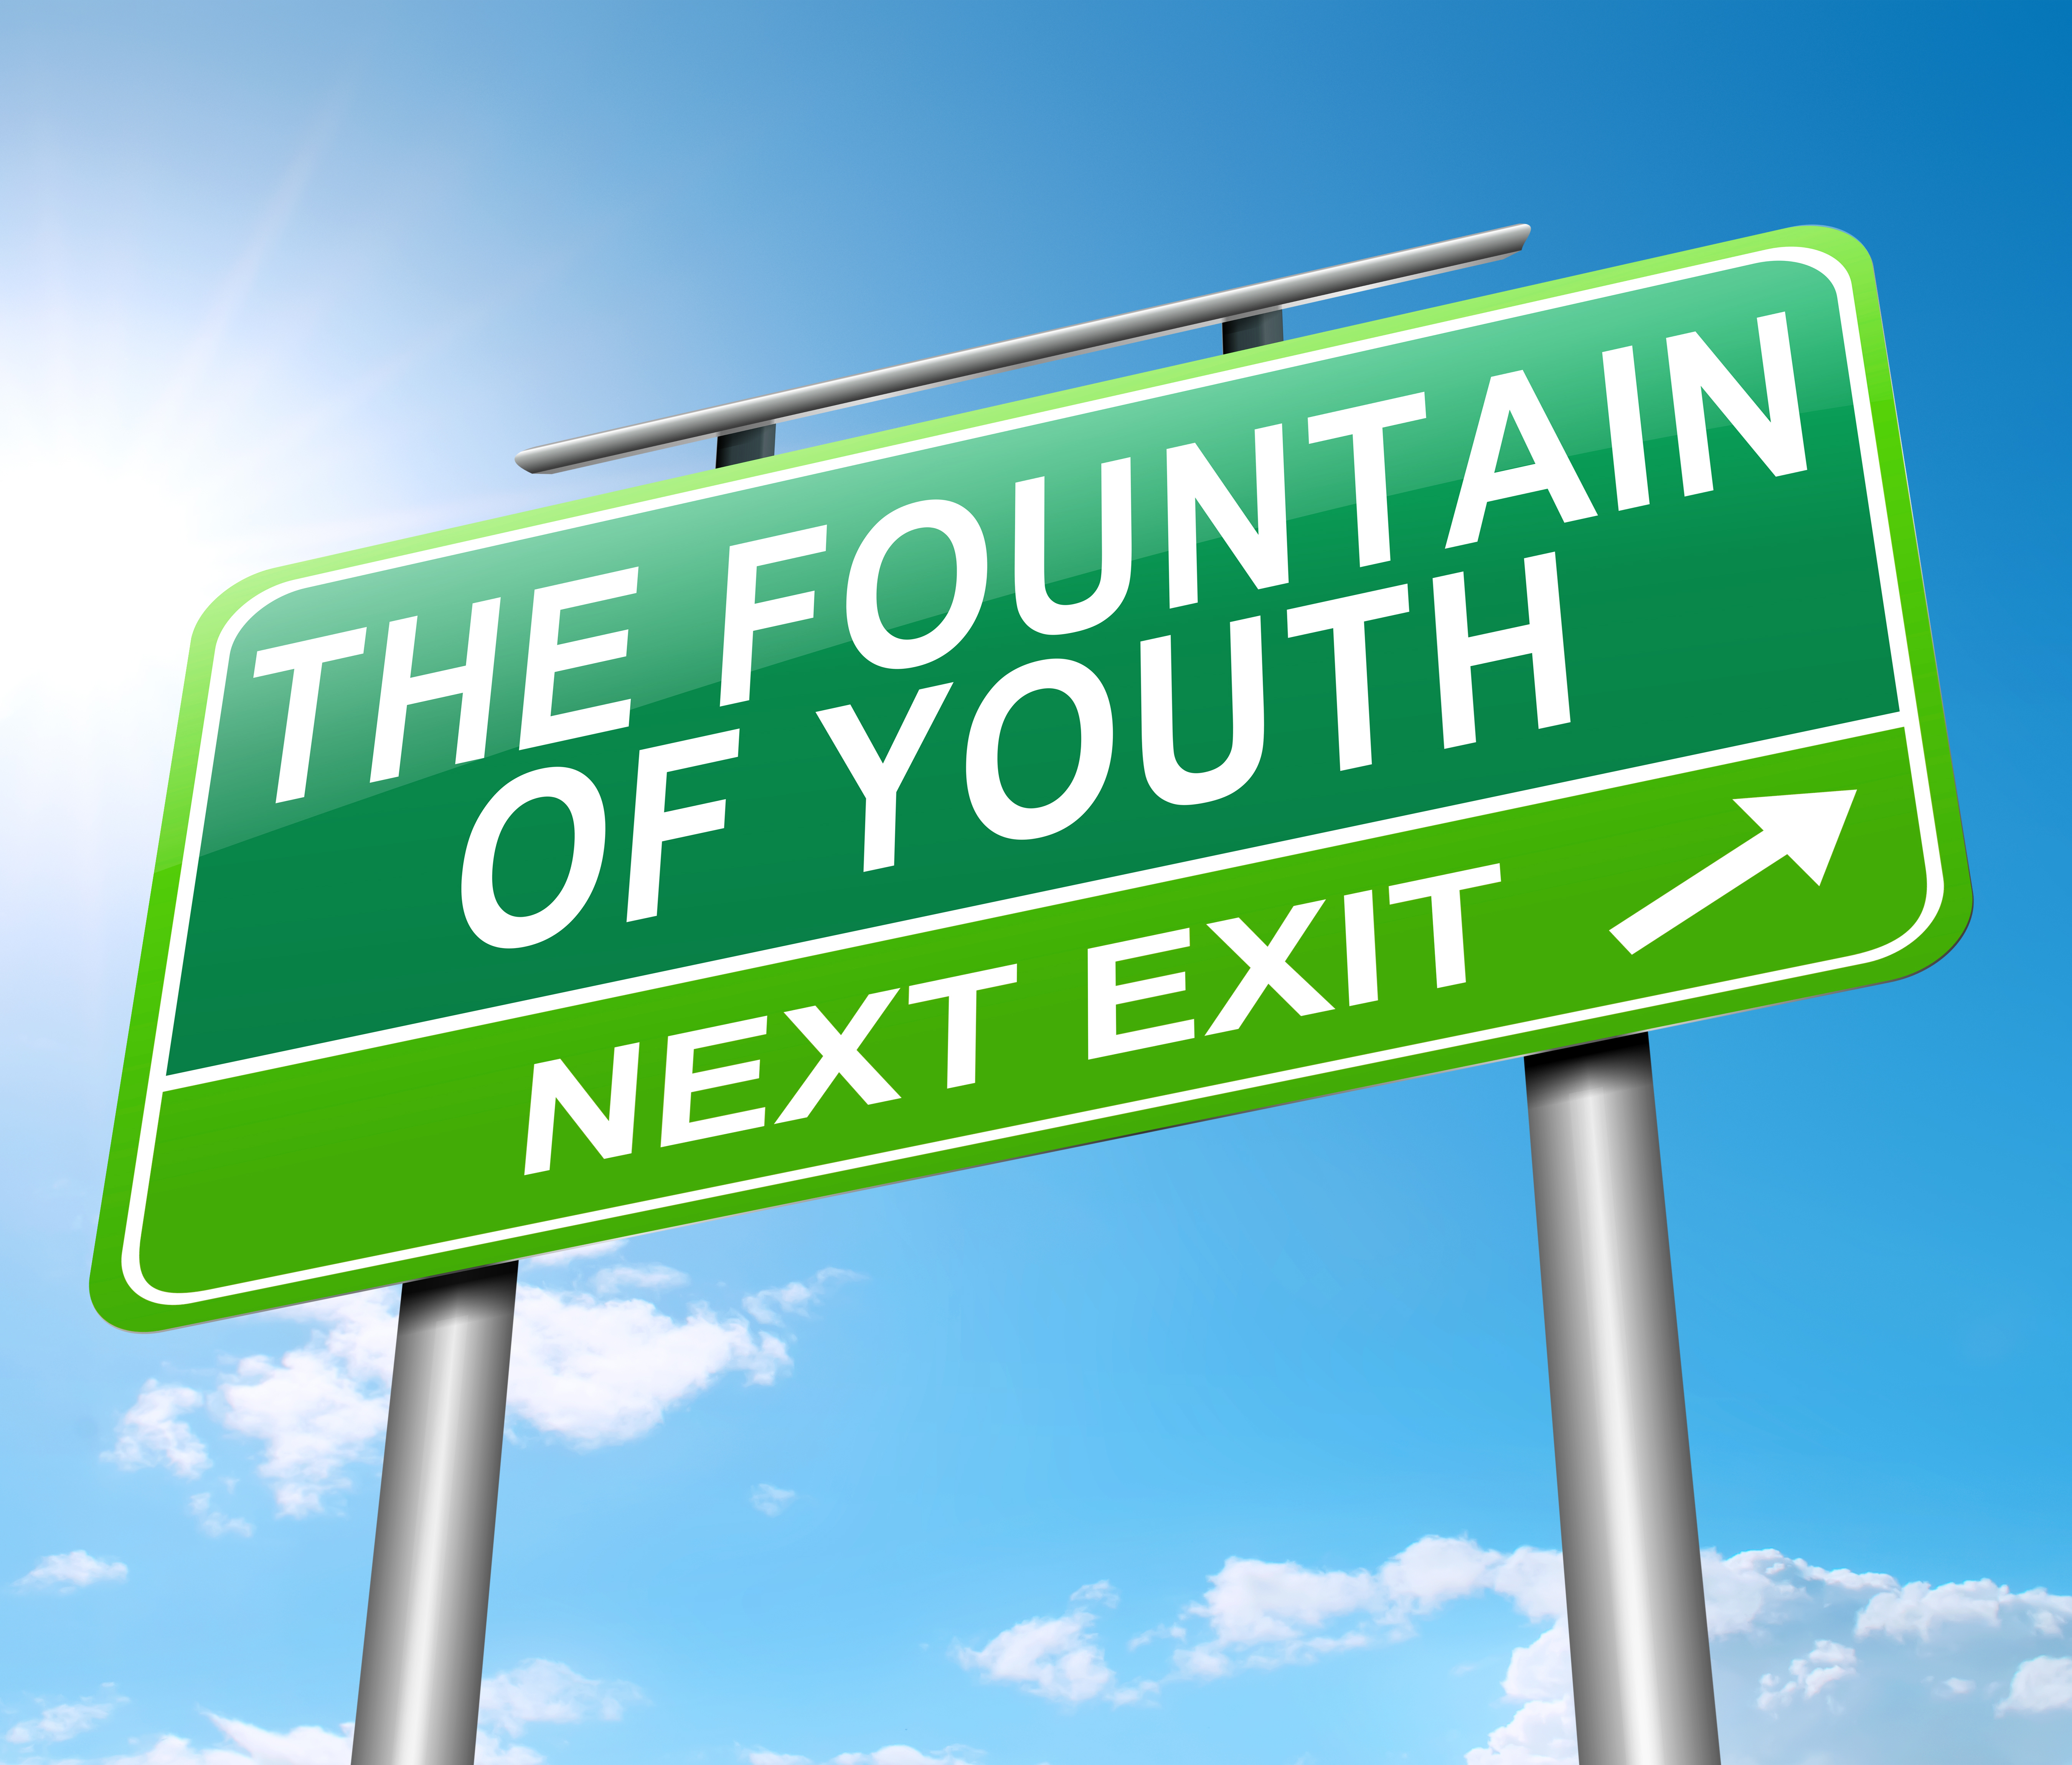 A road sign reading: the fountain of youth, next exit